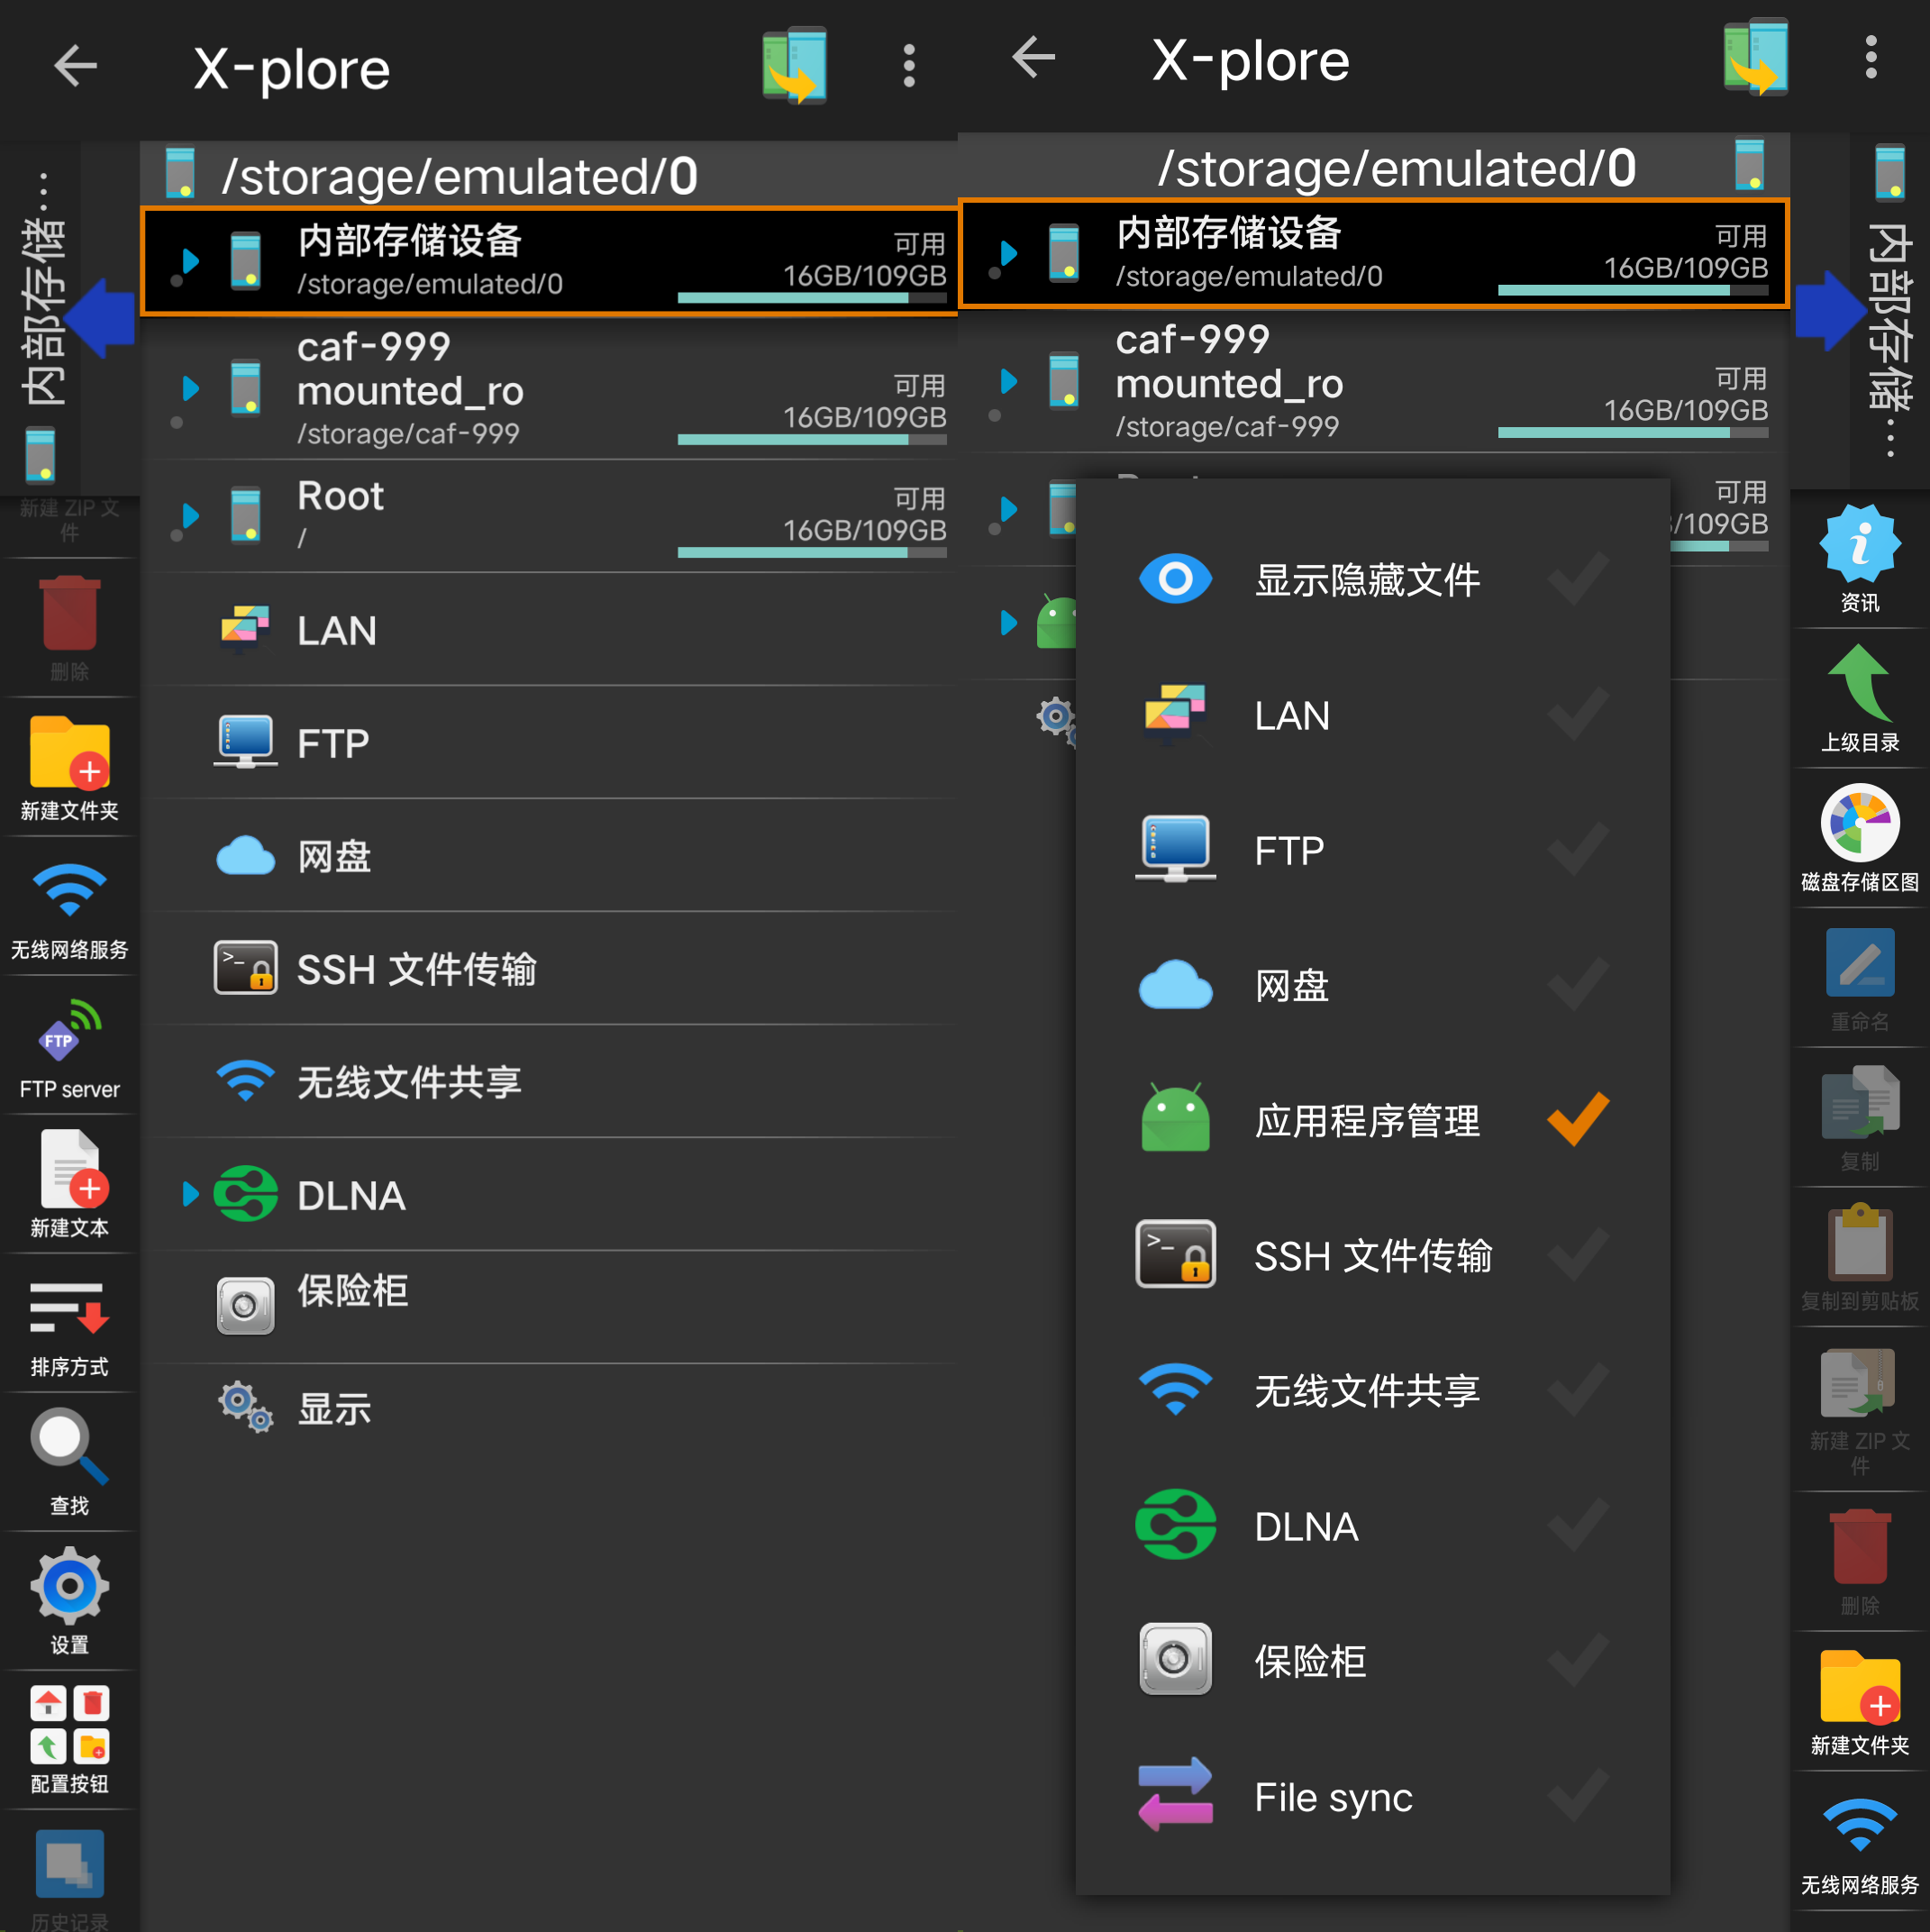 Android X-plore 文件管理器_v4.32.08